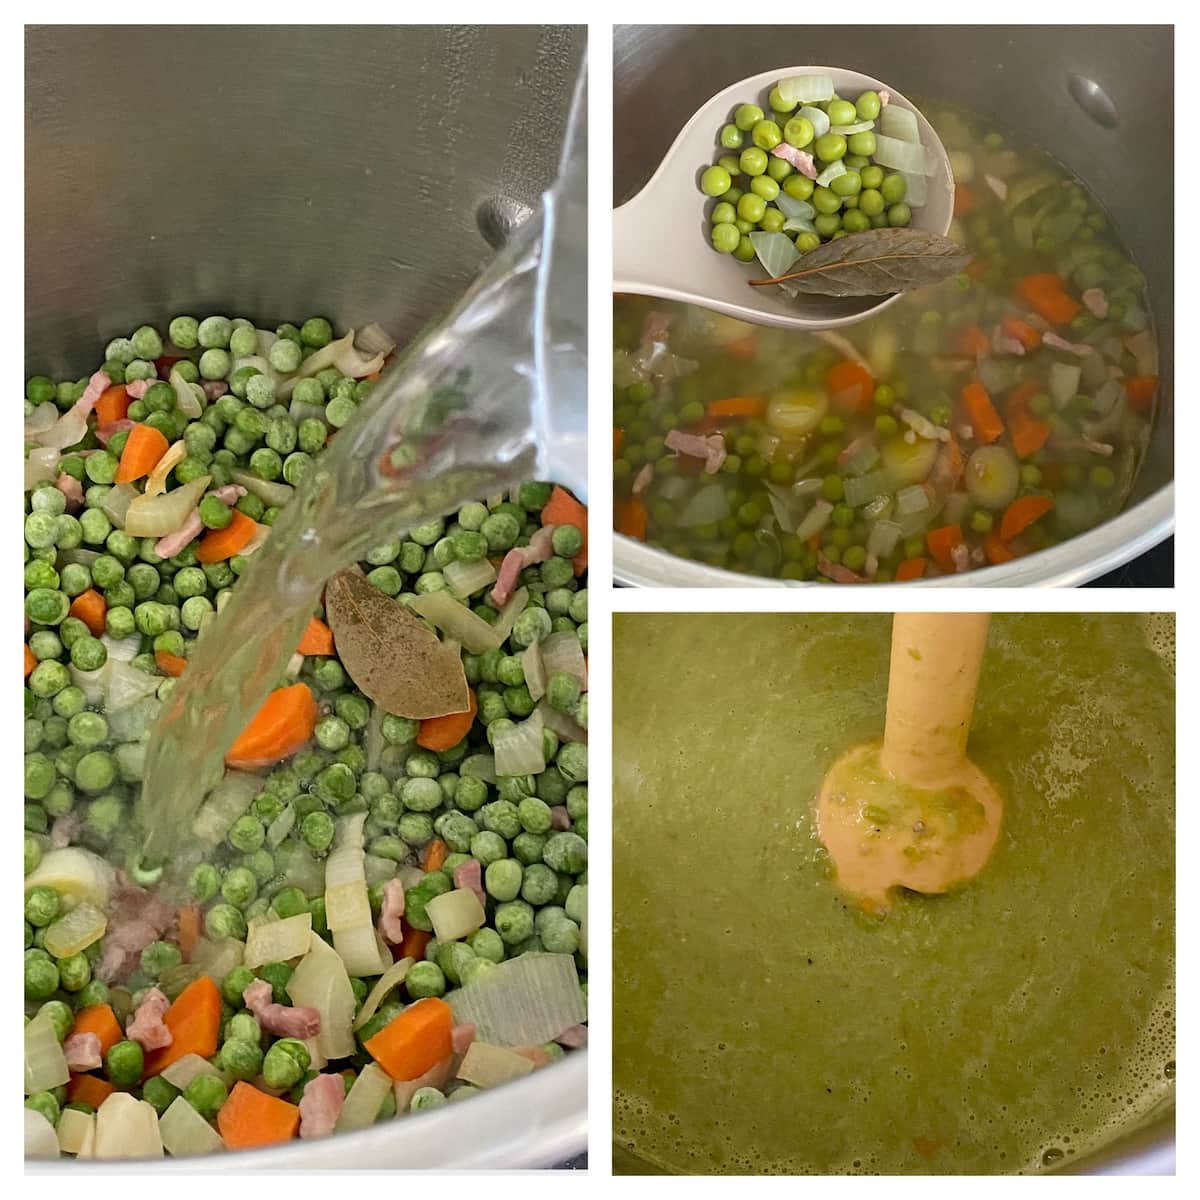 adding water to peas, leeks and carrot in a pot and mixing with a blender